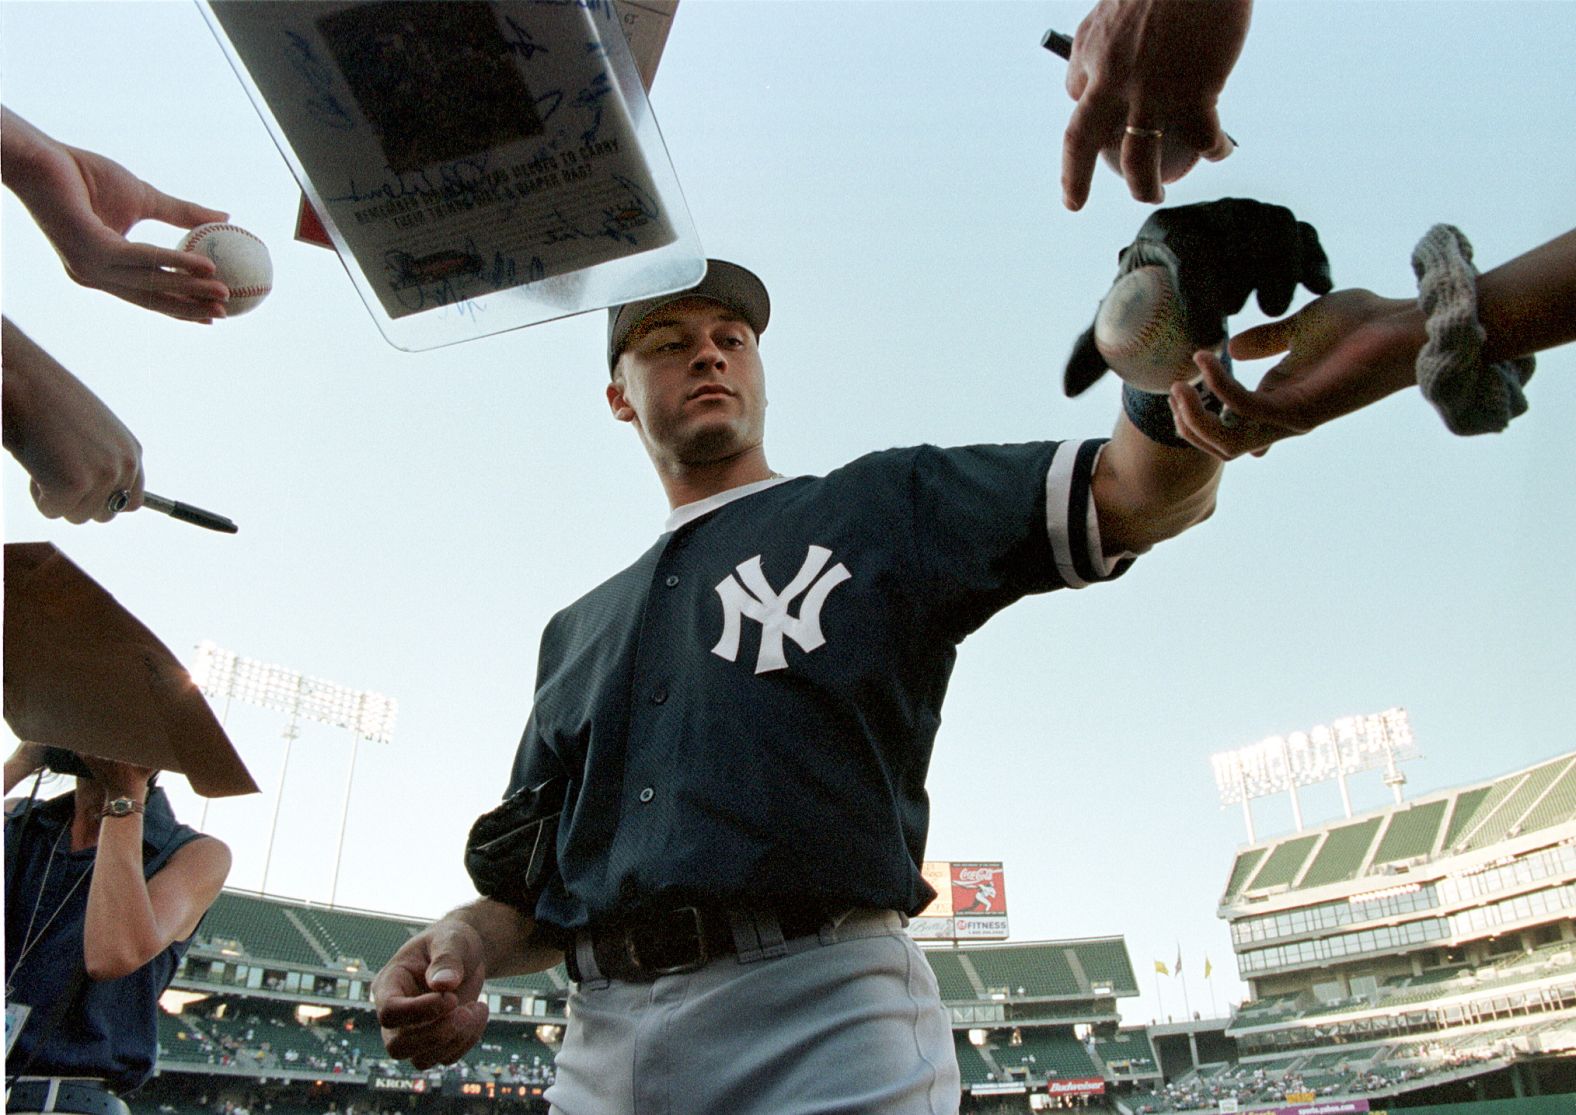 Jeter signs autographs before a game in Oakland in August 1998.